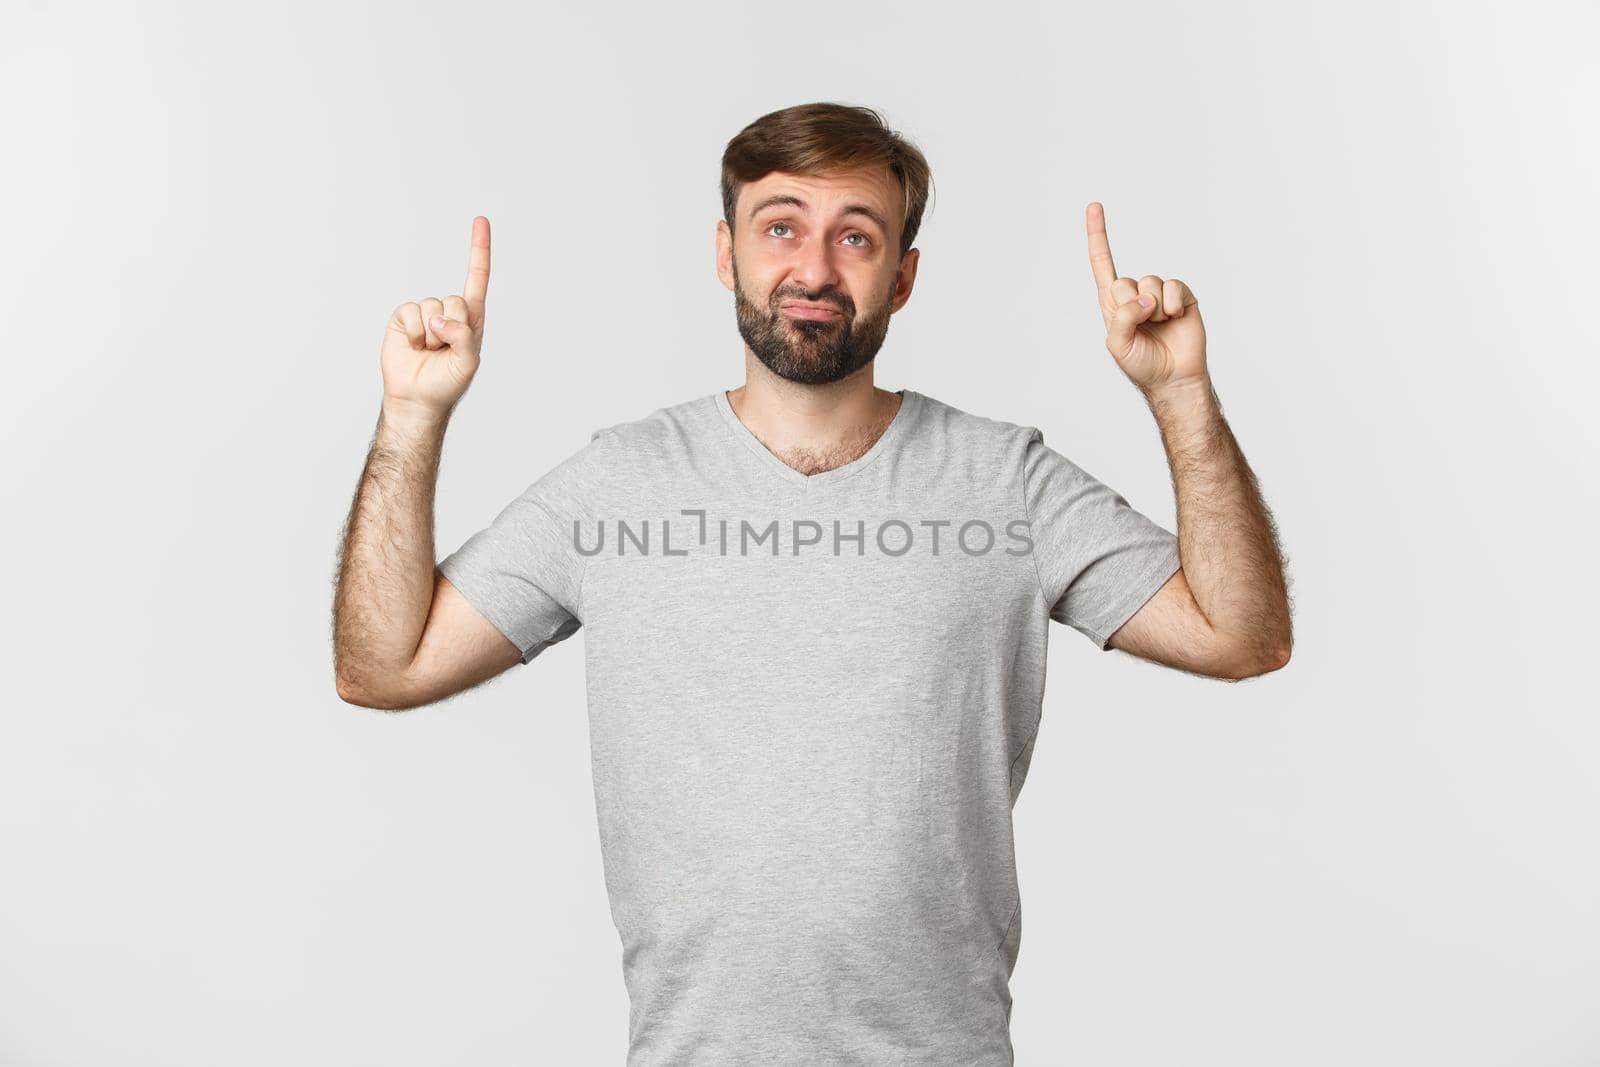 Skeptical and unimpressed adult man with beard, looking up and pouting displeased, standing over white background in gray t-shirt.